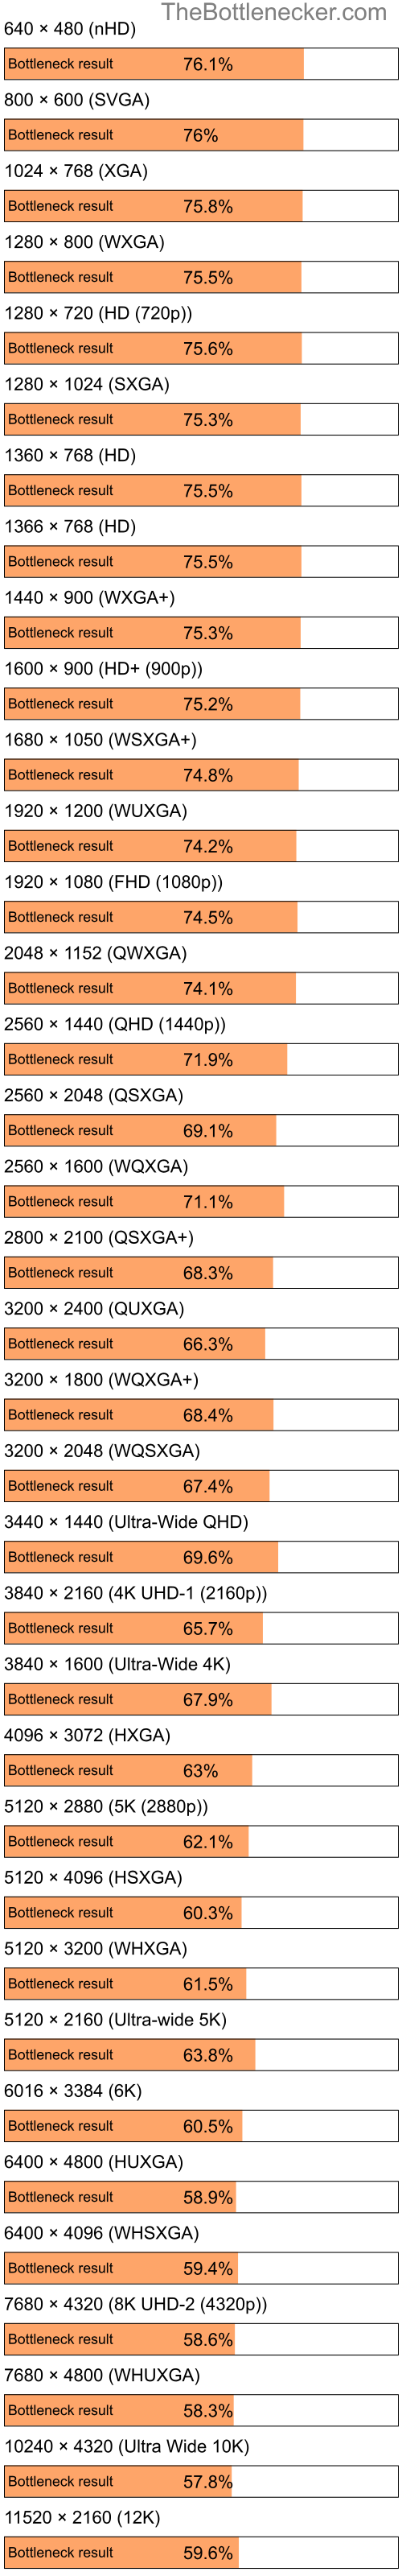 Bottleneck results by resolution for AMD Athlon II X4 615e and NVIDIA GeForce RTX 3080 Ti in General Tasks